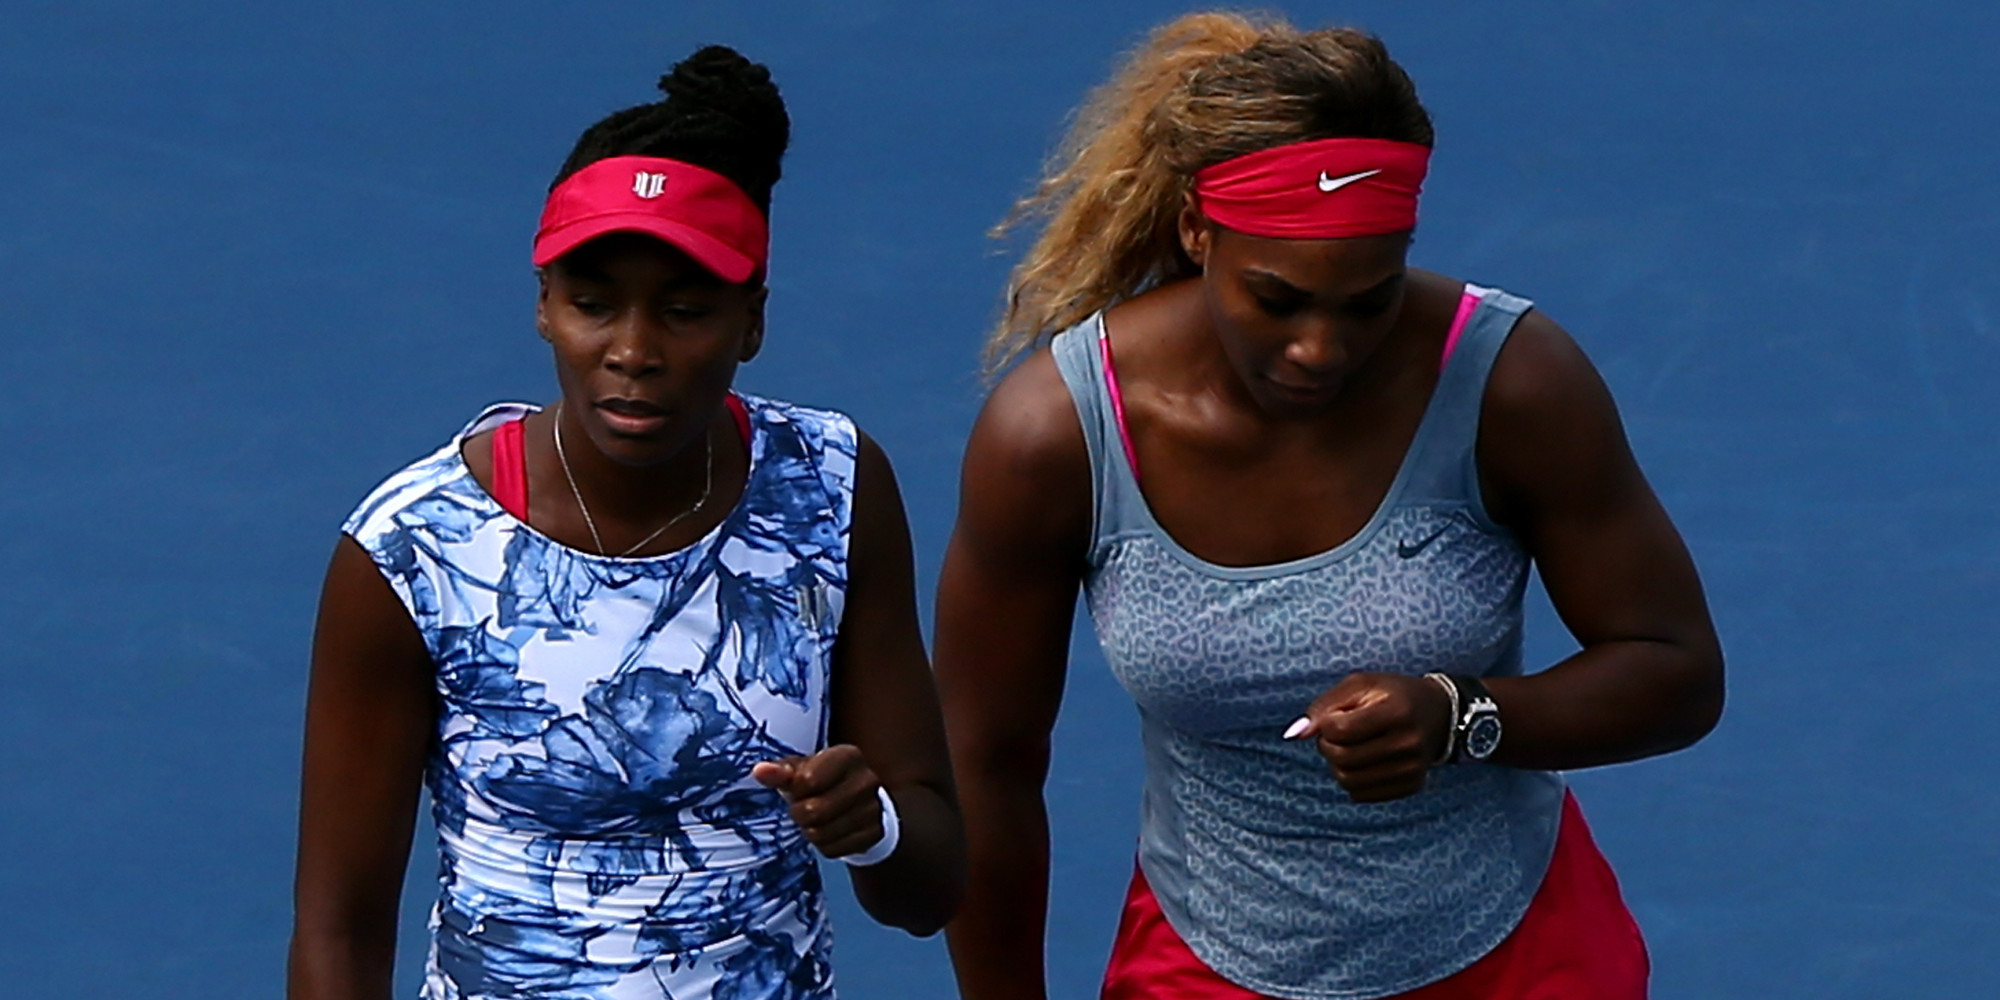 Russian Tennis Federation President Banned Over Williams 'Brothers' Comments | HuffPost